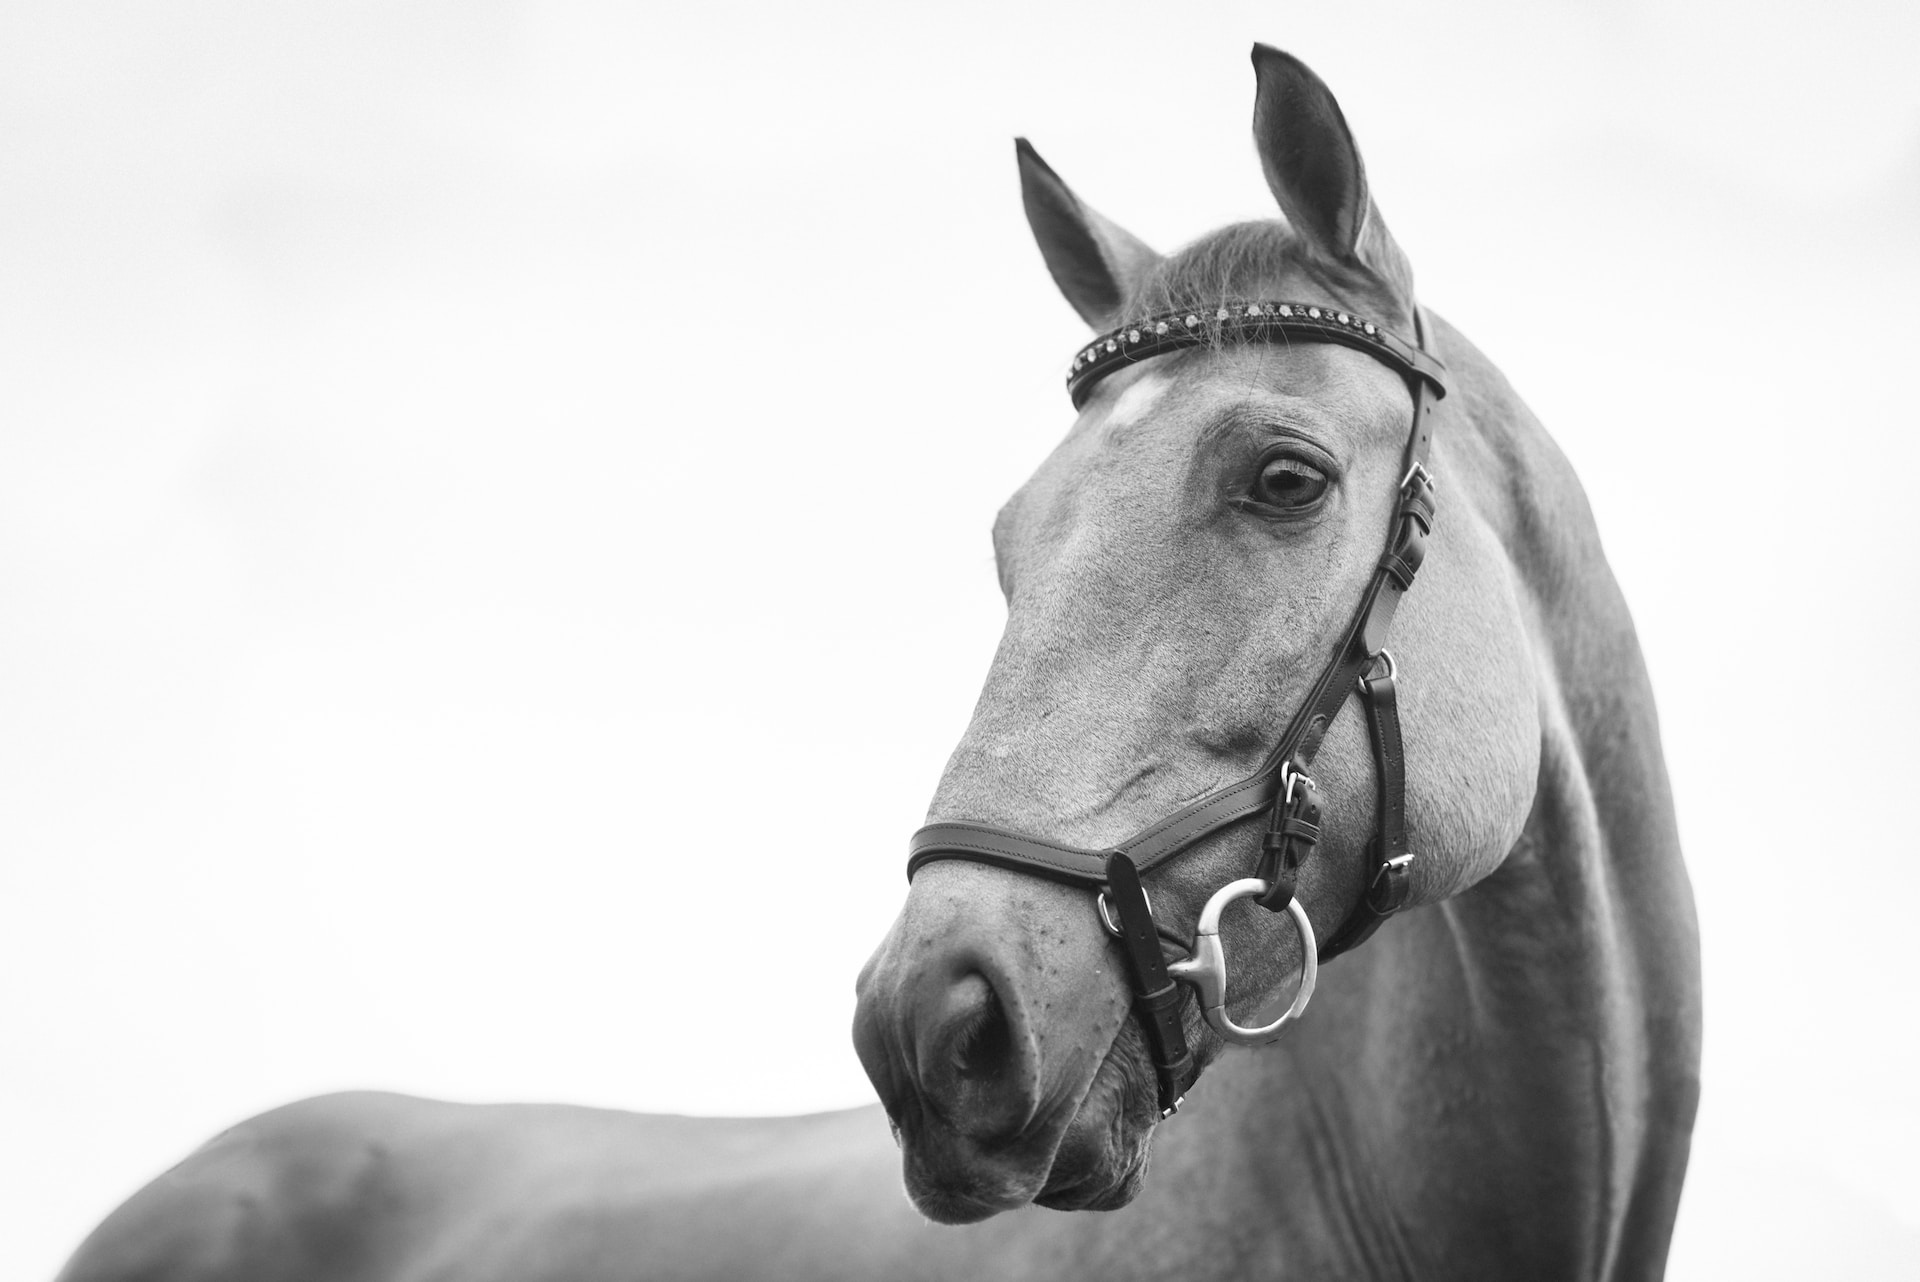 horse behavioural issues - an image of horse with a bridle on in black and white